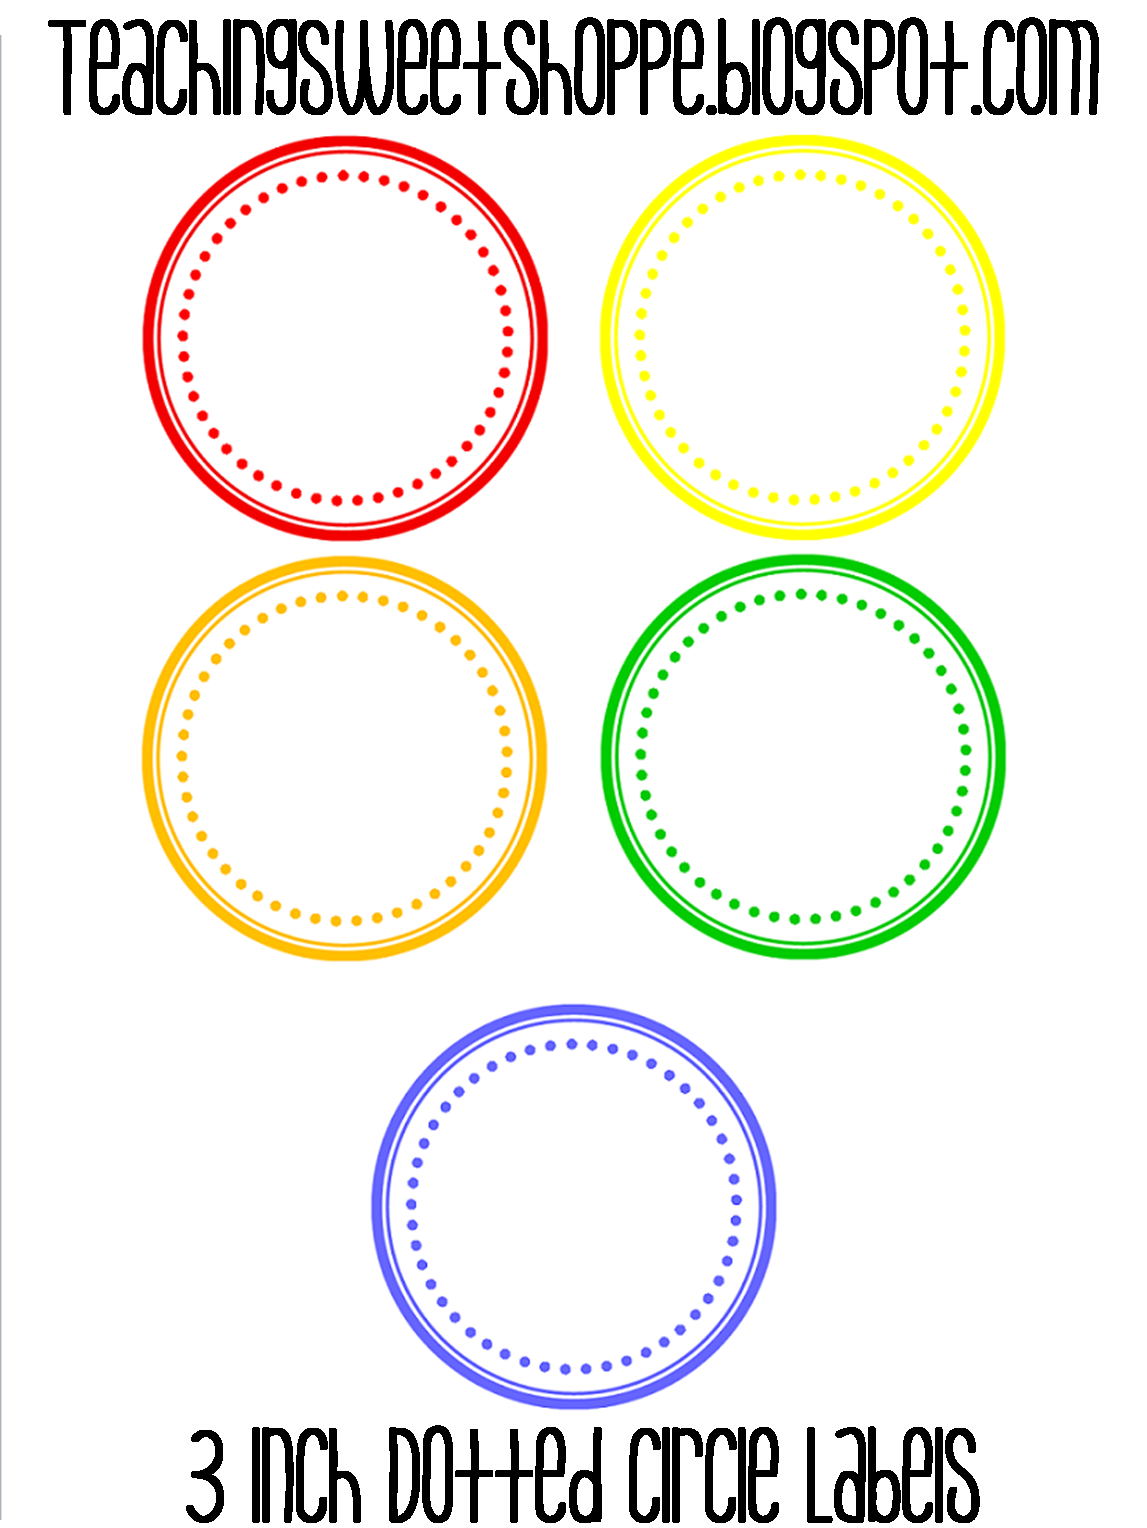 the-teaching-sweet-shoppe-dotted-circle-labels